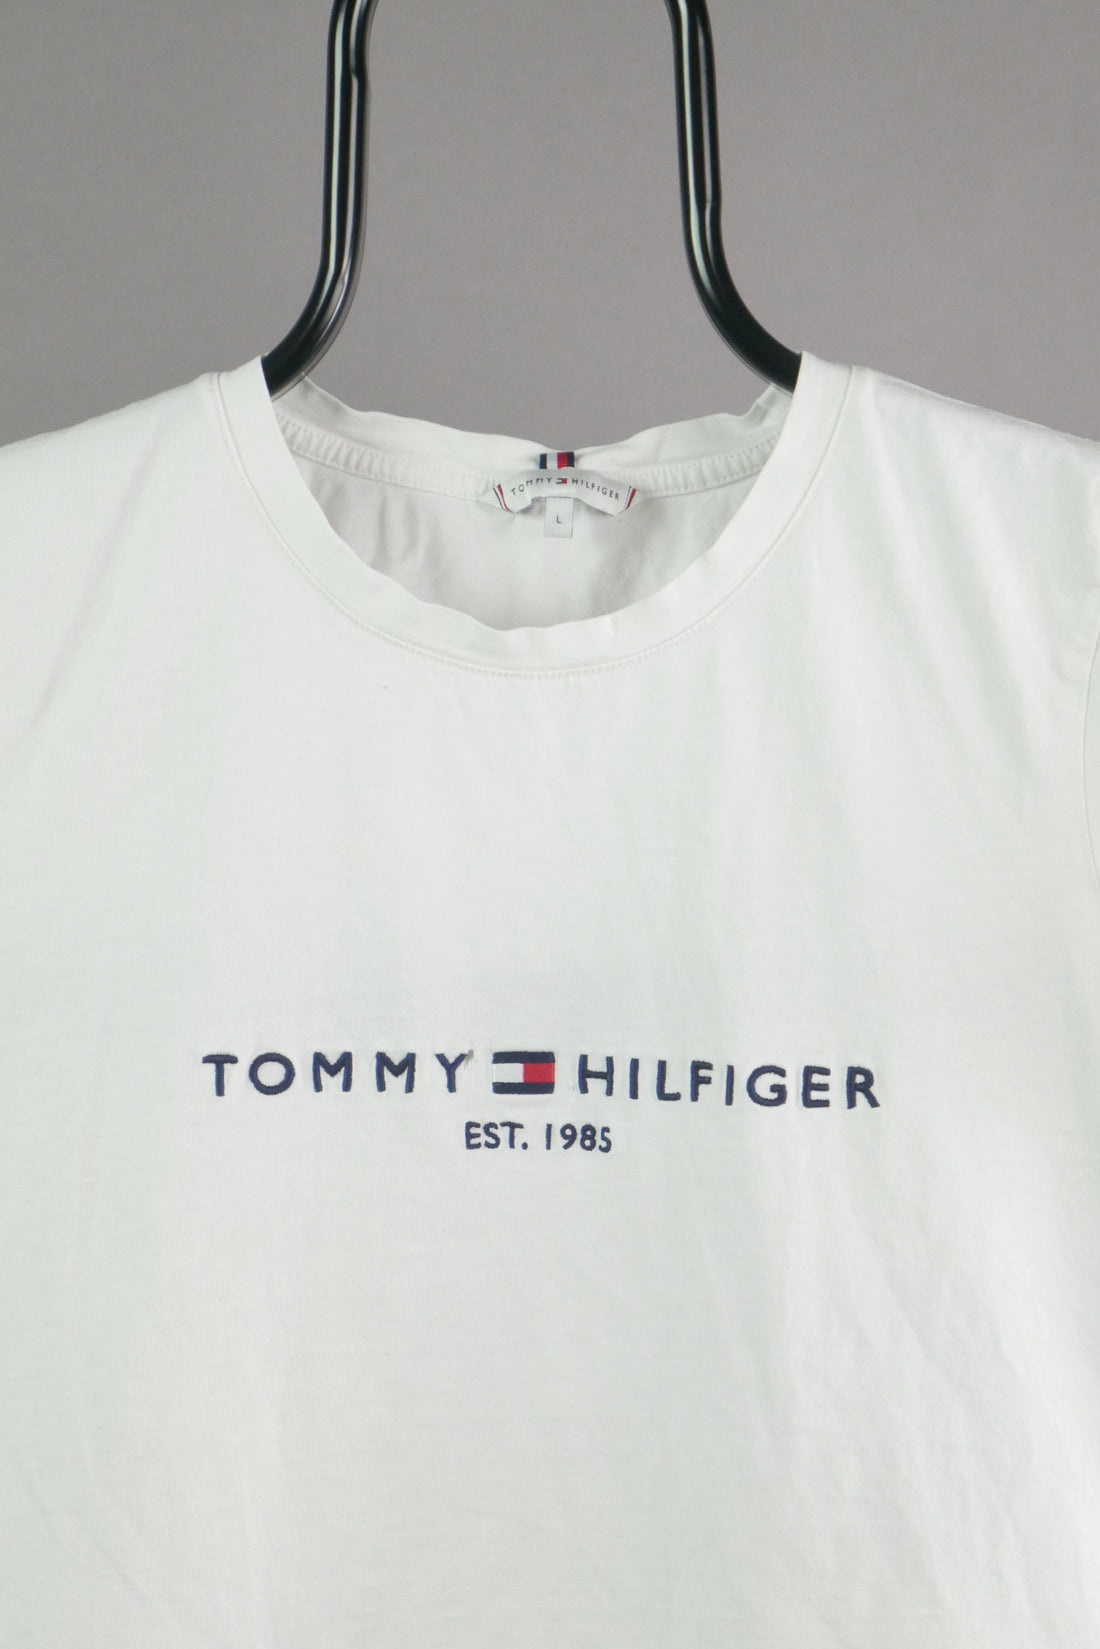 The Tommy Hilfiger Embroidered Logo T-Shirt (L)